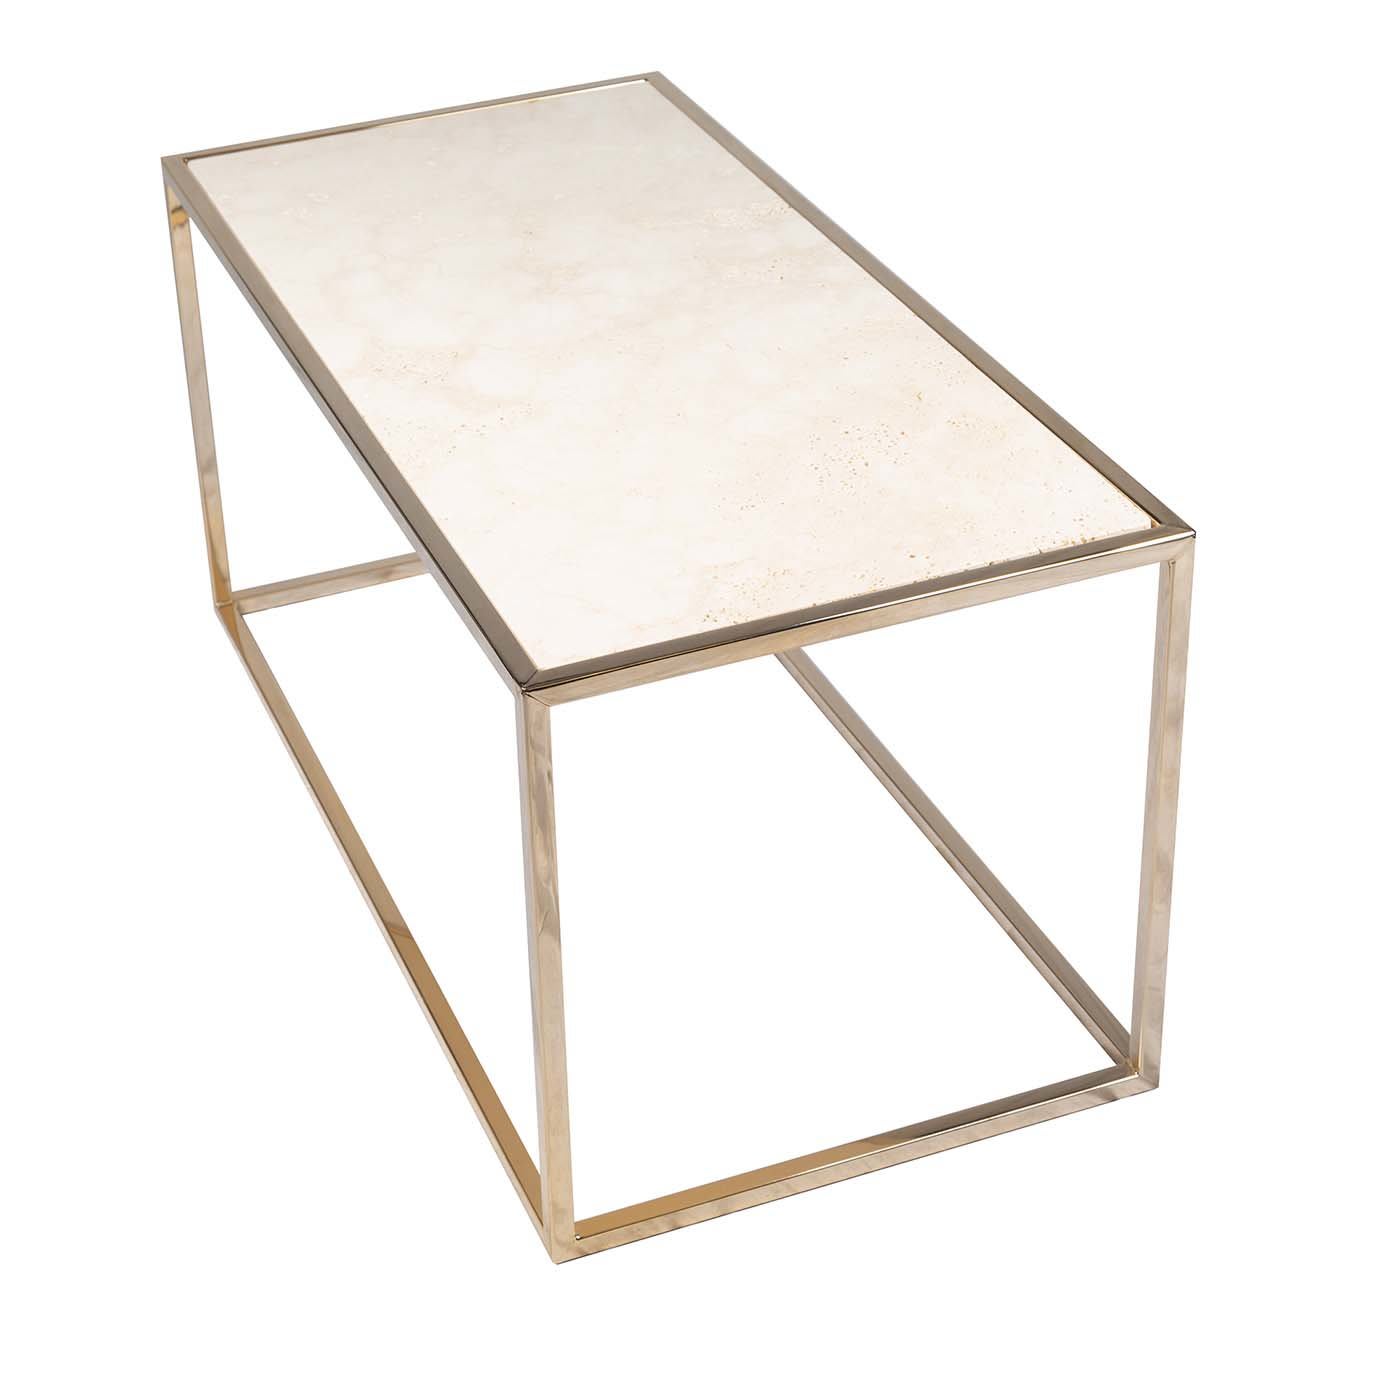 Cube rectangular coffee table with gold finish - Cube3